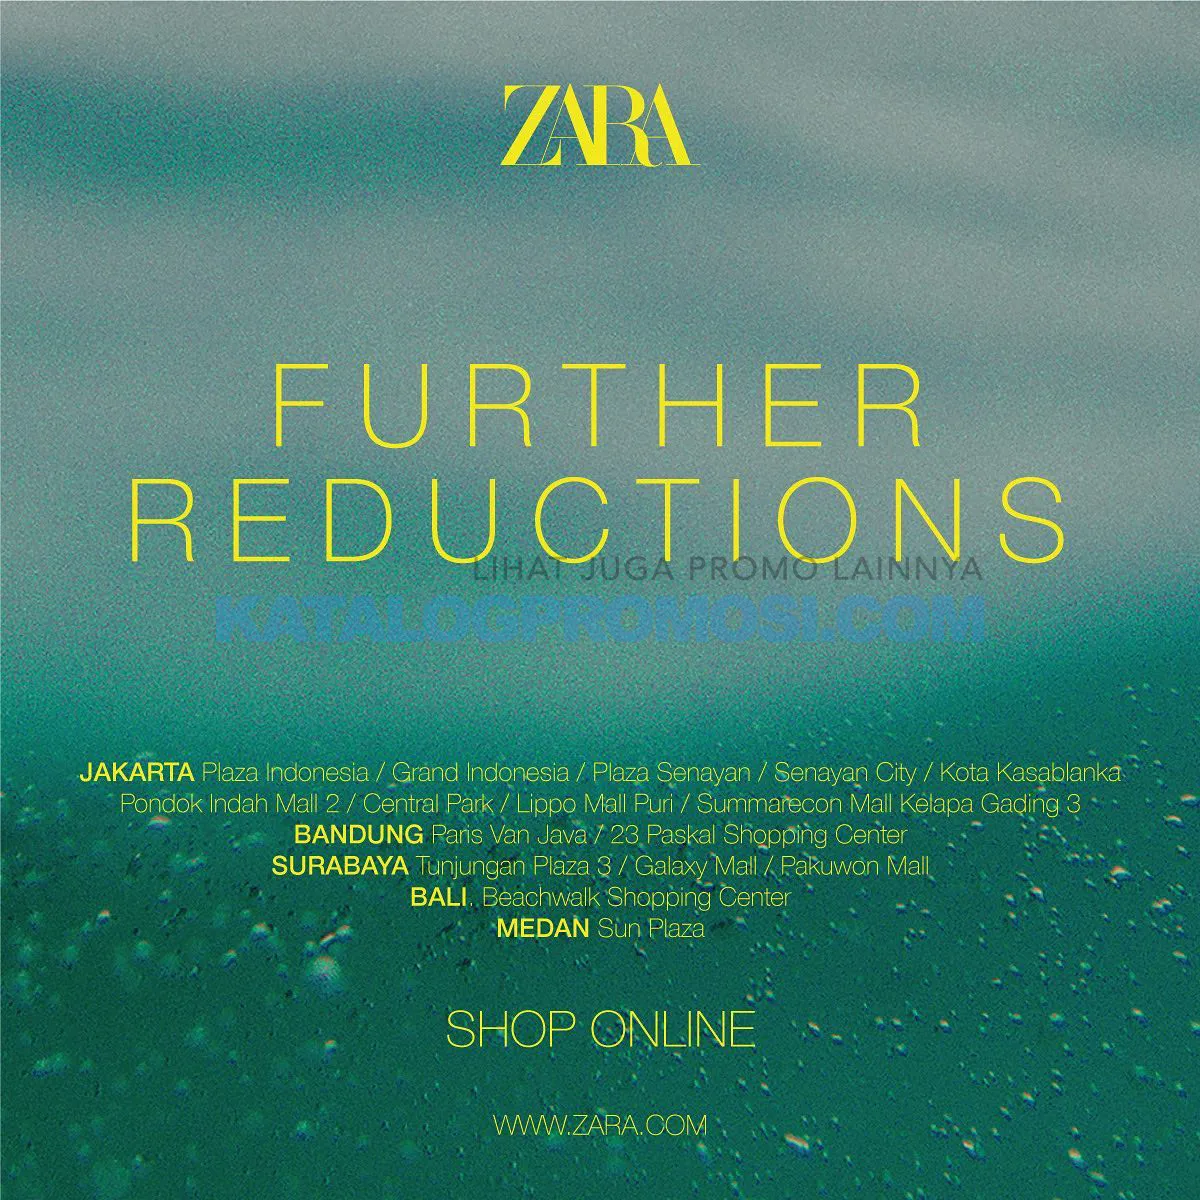 Promo ZARA Further Reductions | SALE up to 50% off